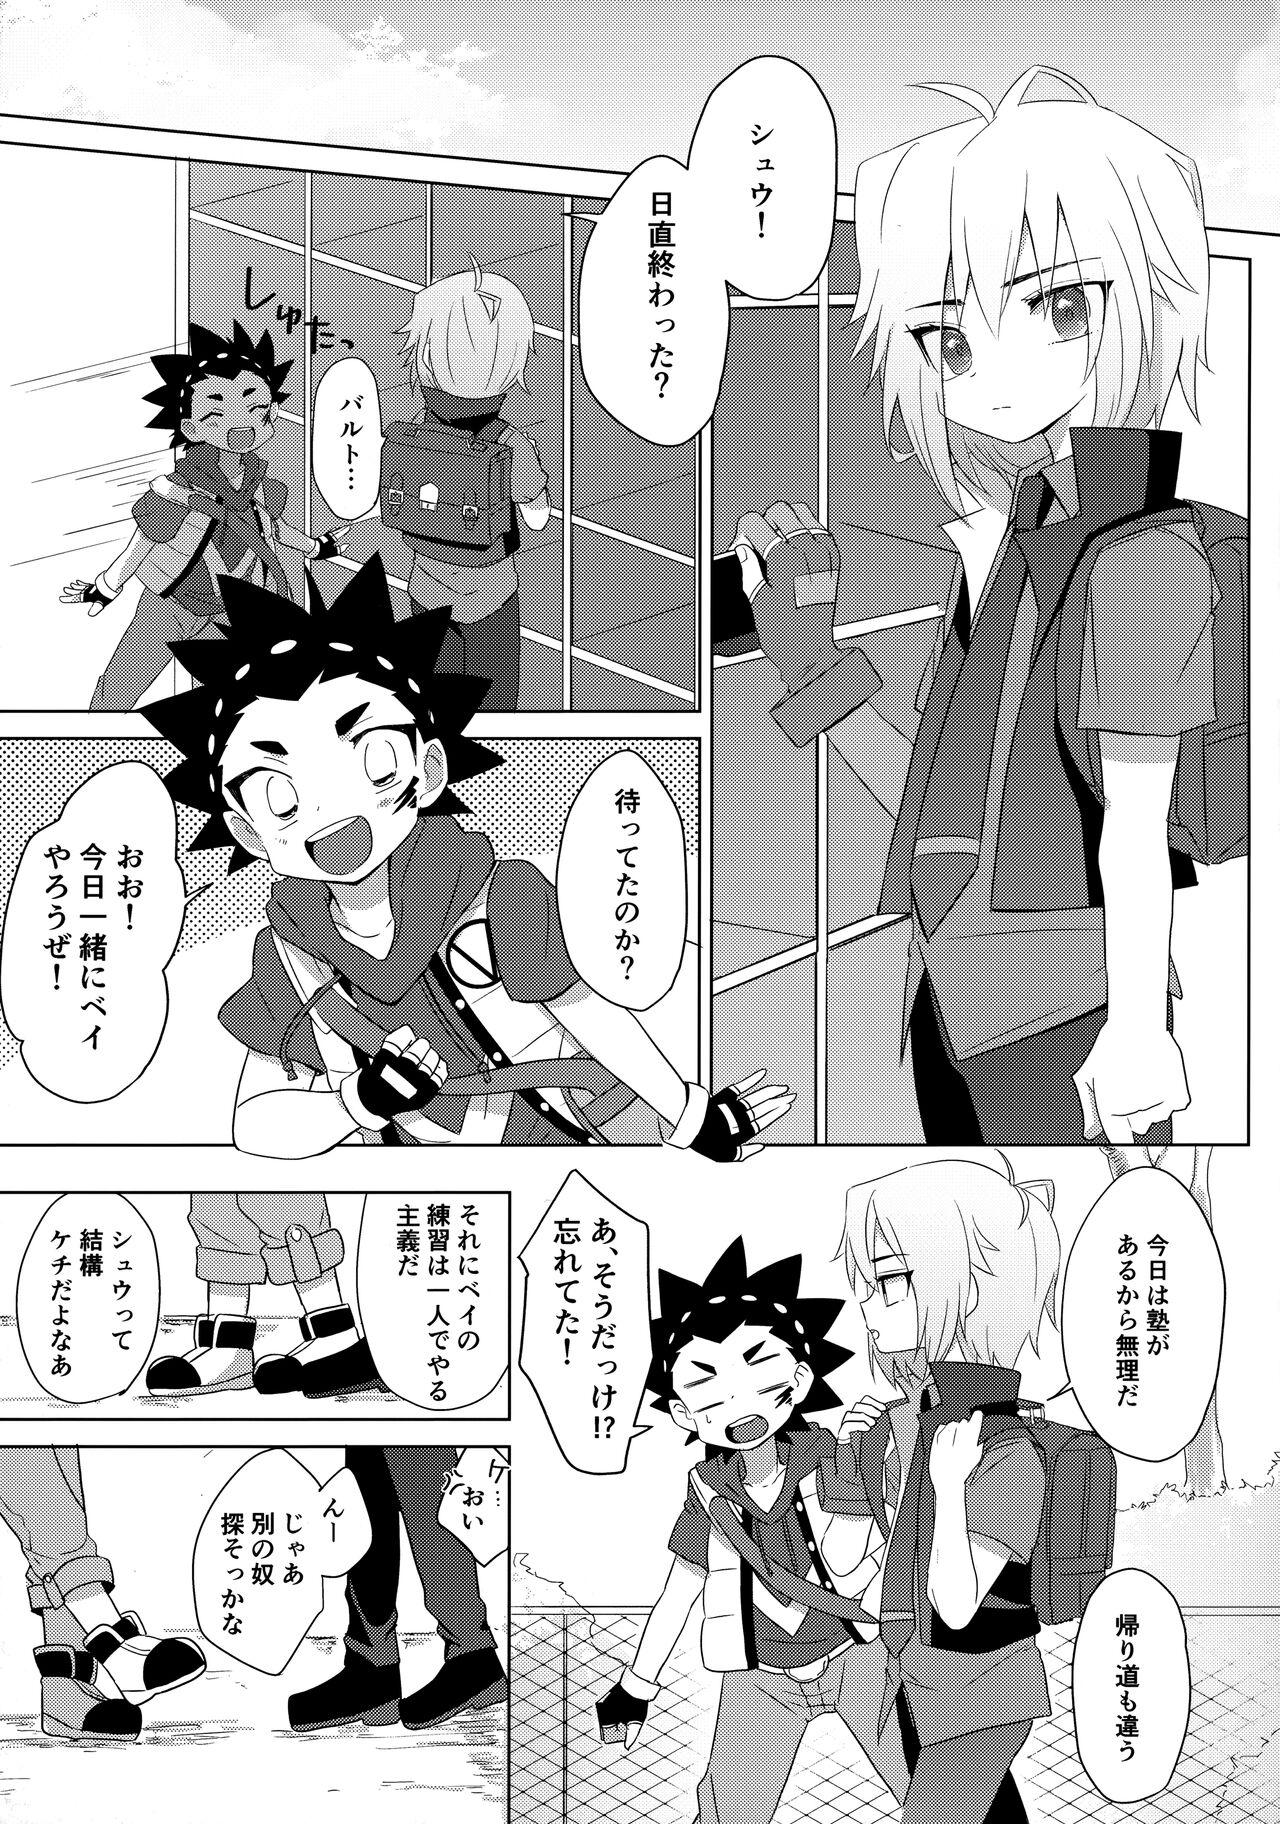 This Hakoniwa Therapy - Beyblade Dick - Page 4